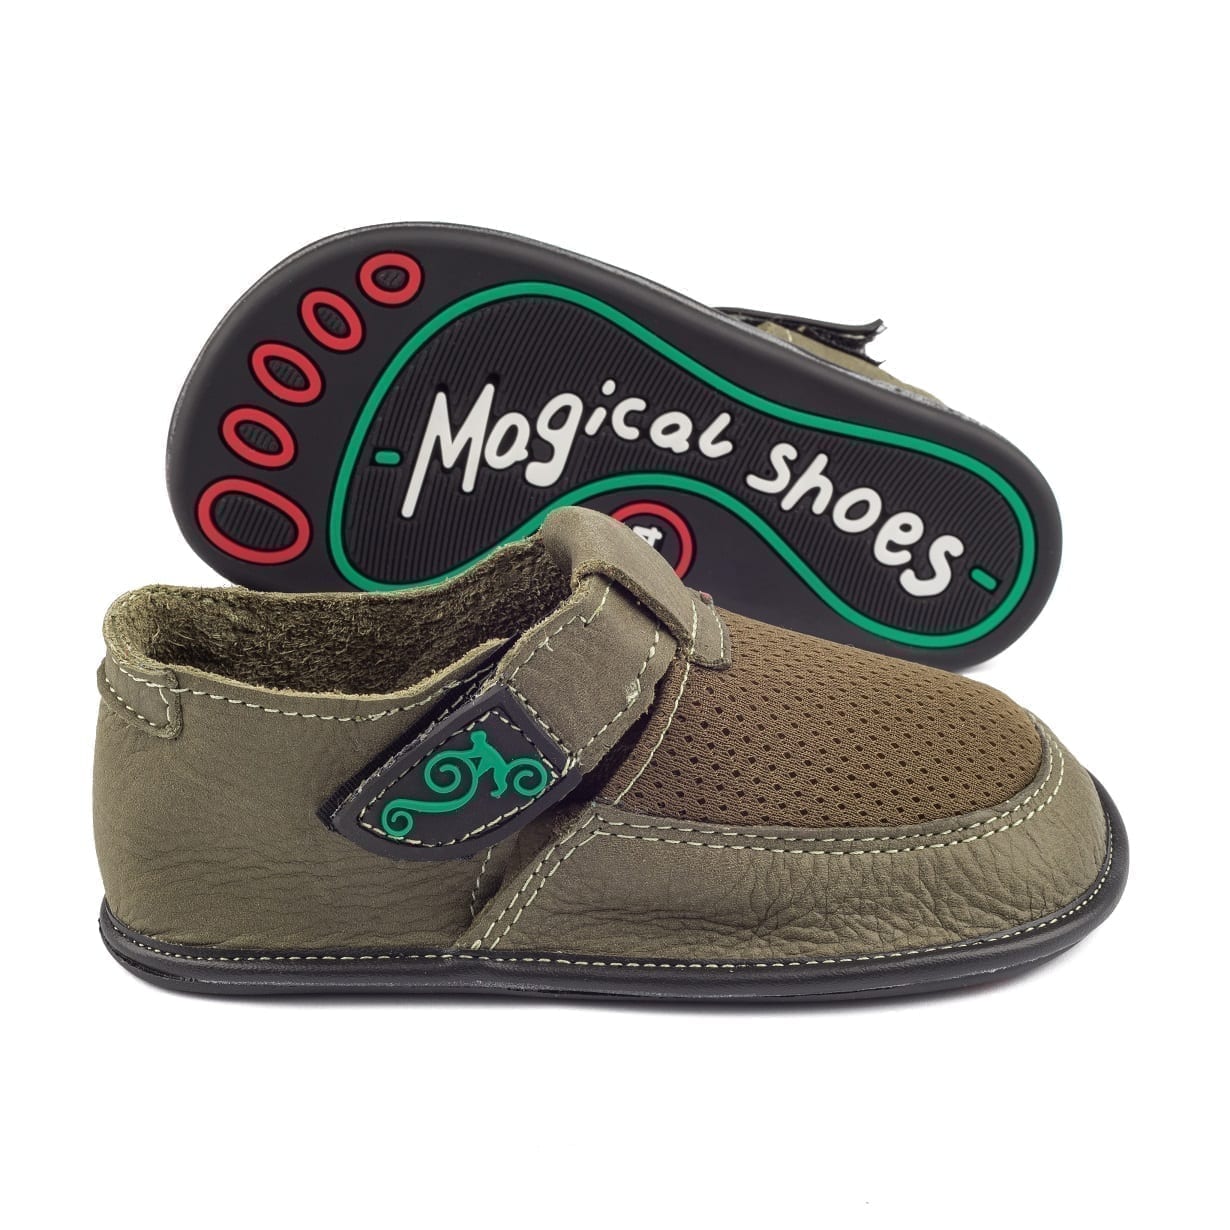 Barefoot shoes for kids